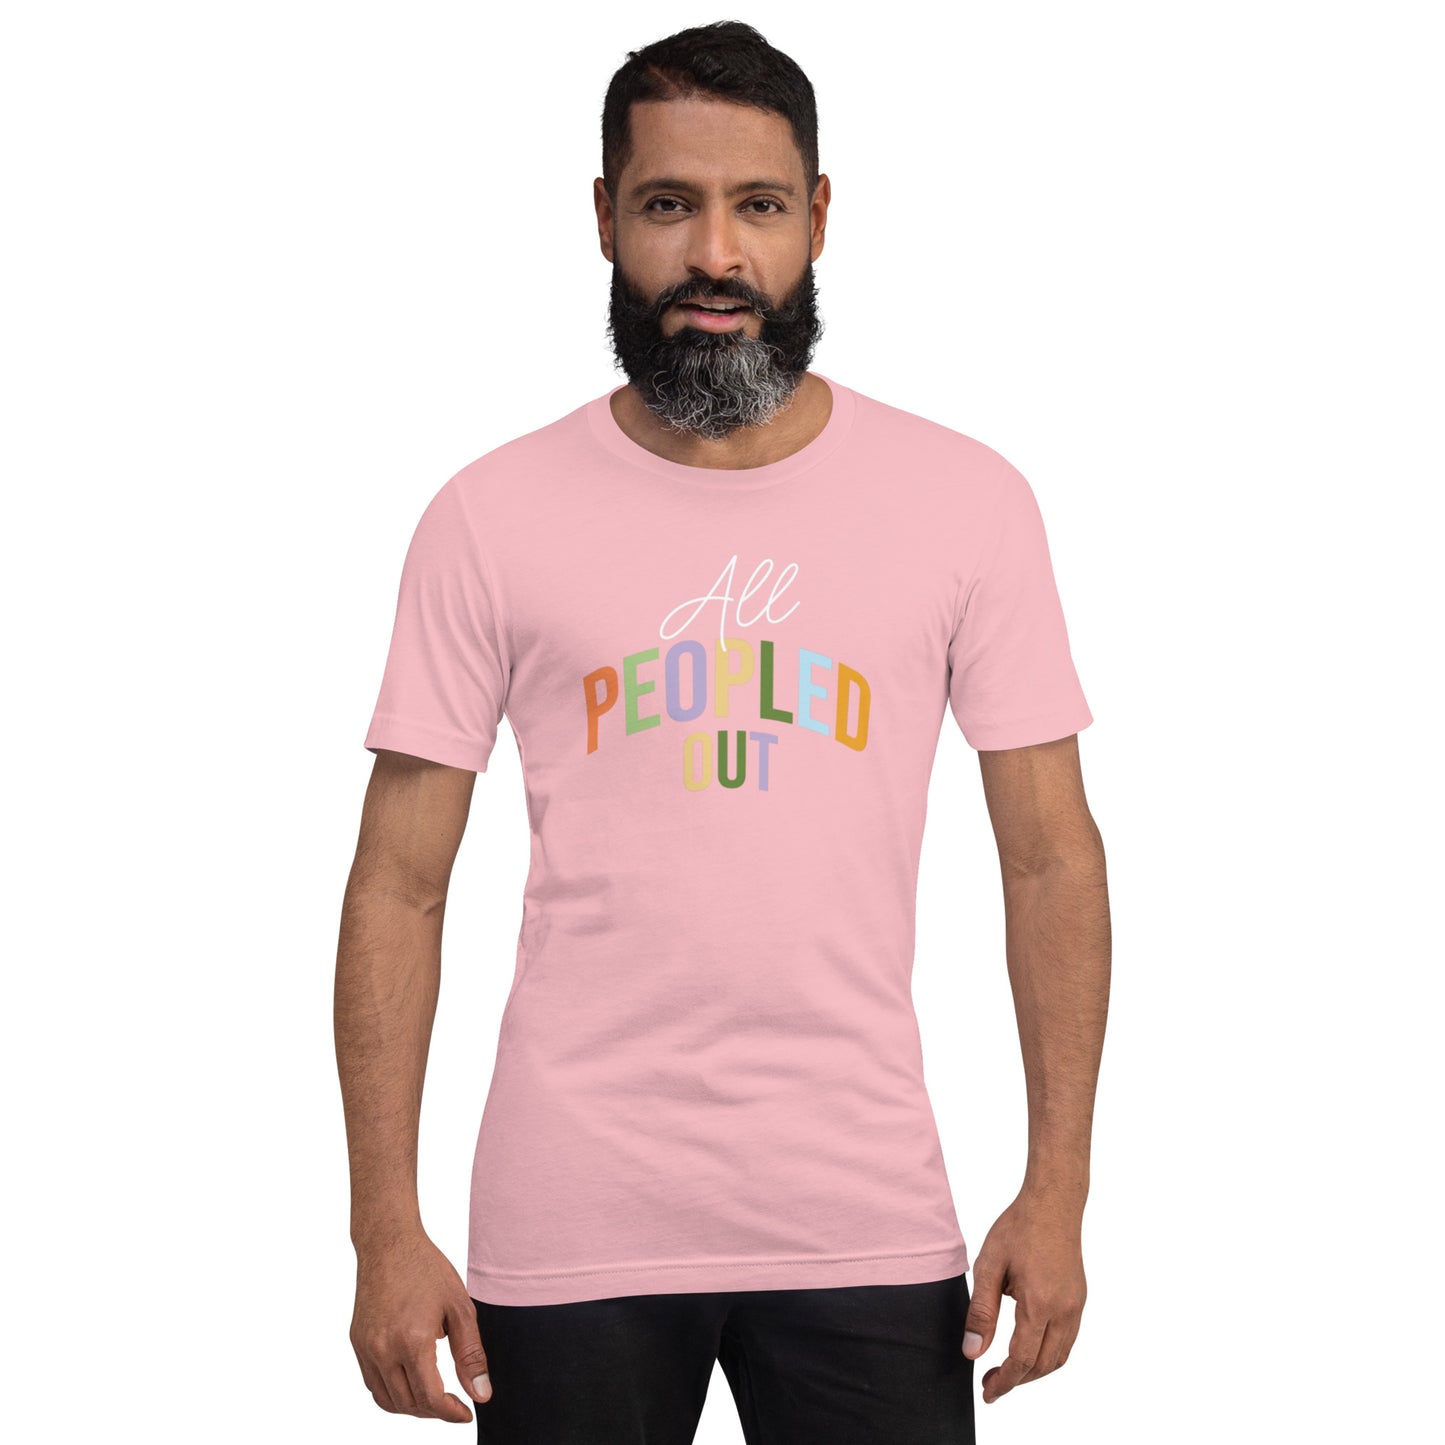 All PEOPLED OUT Unisex t-shirt